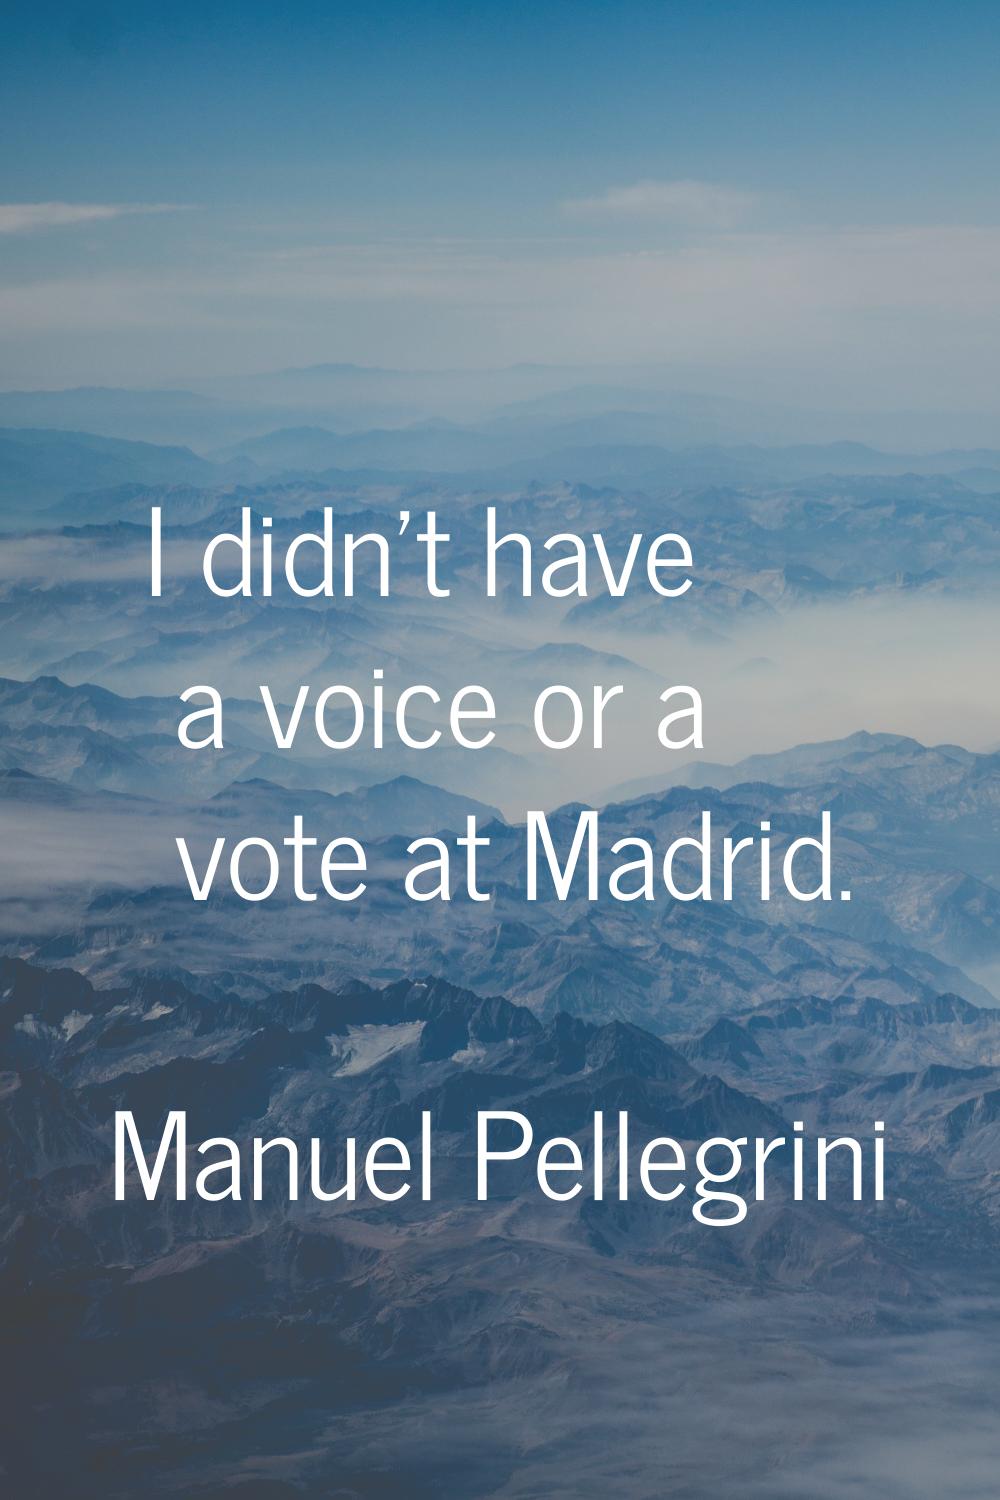 I didn't have a voice or a vote at Madrid.